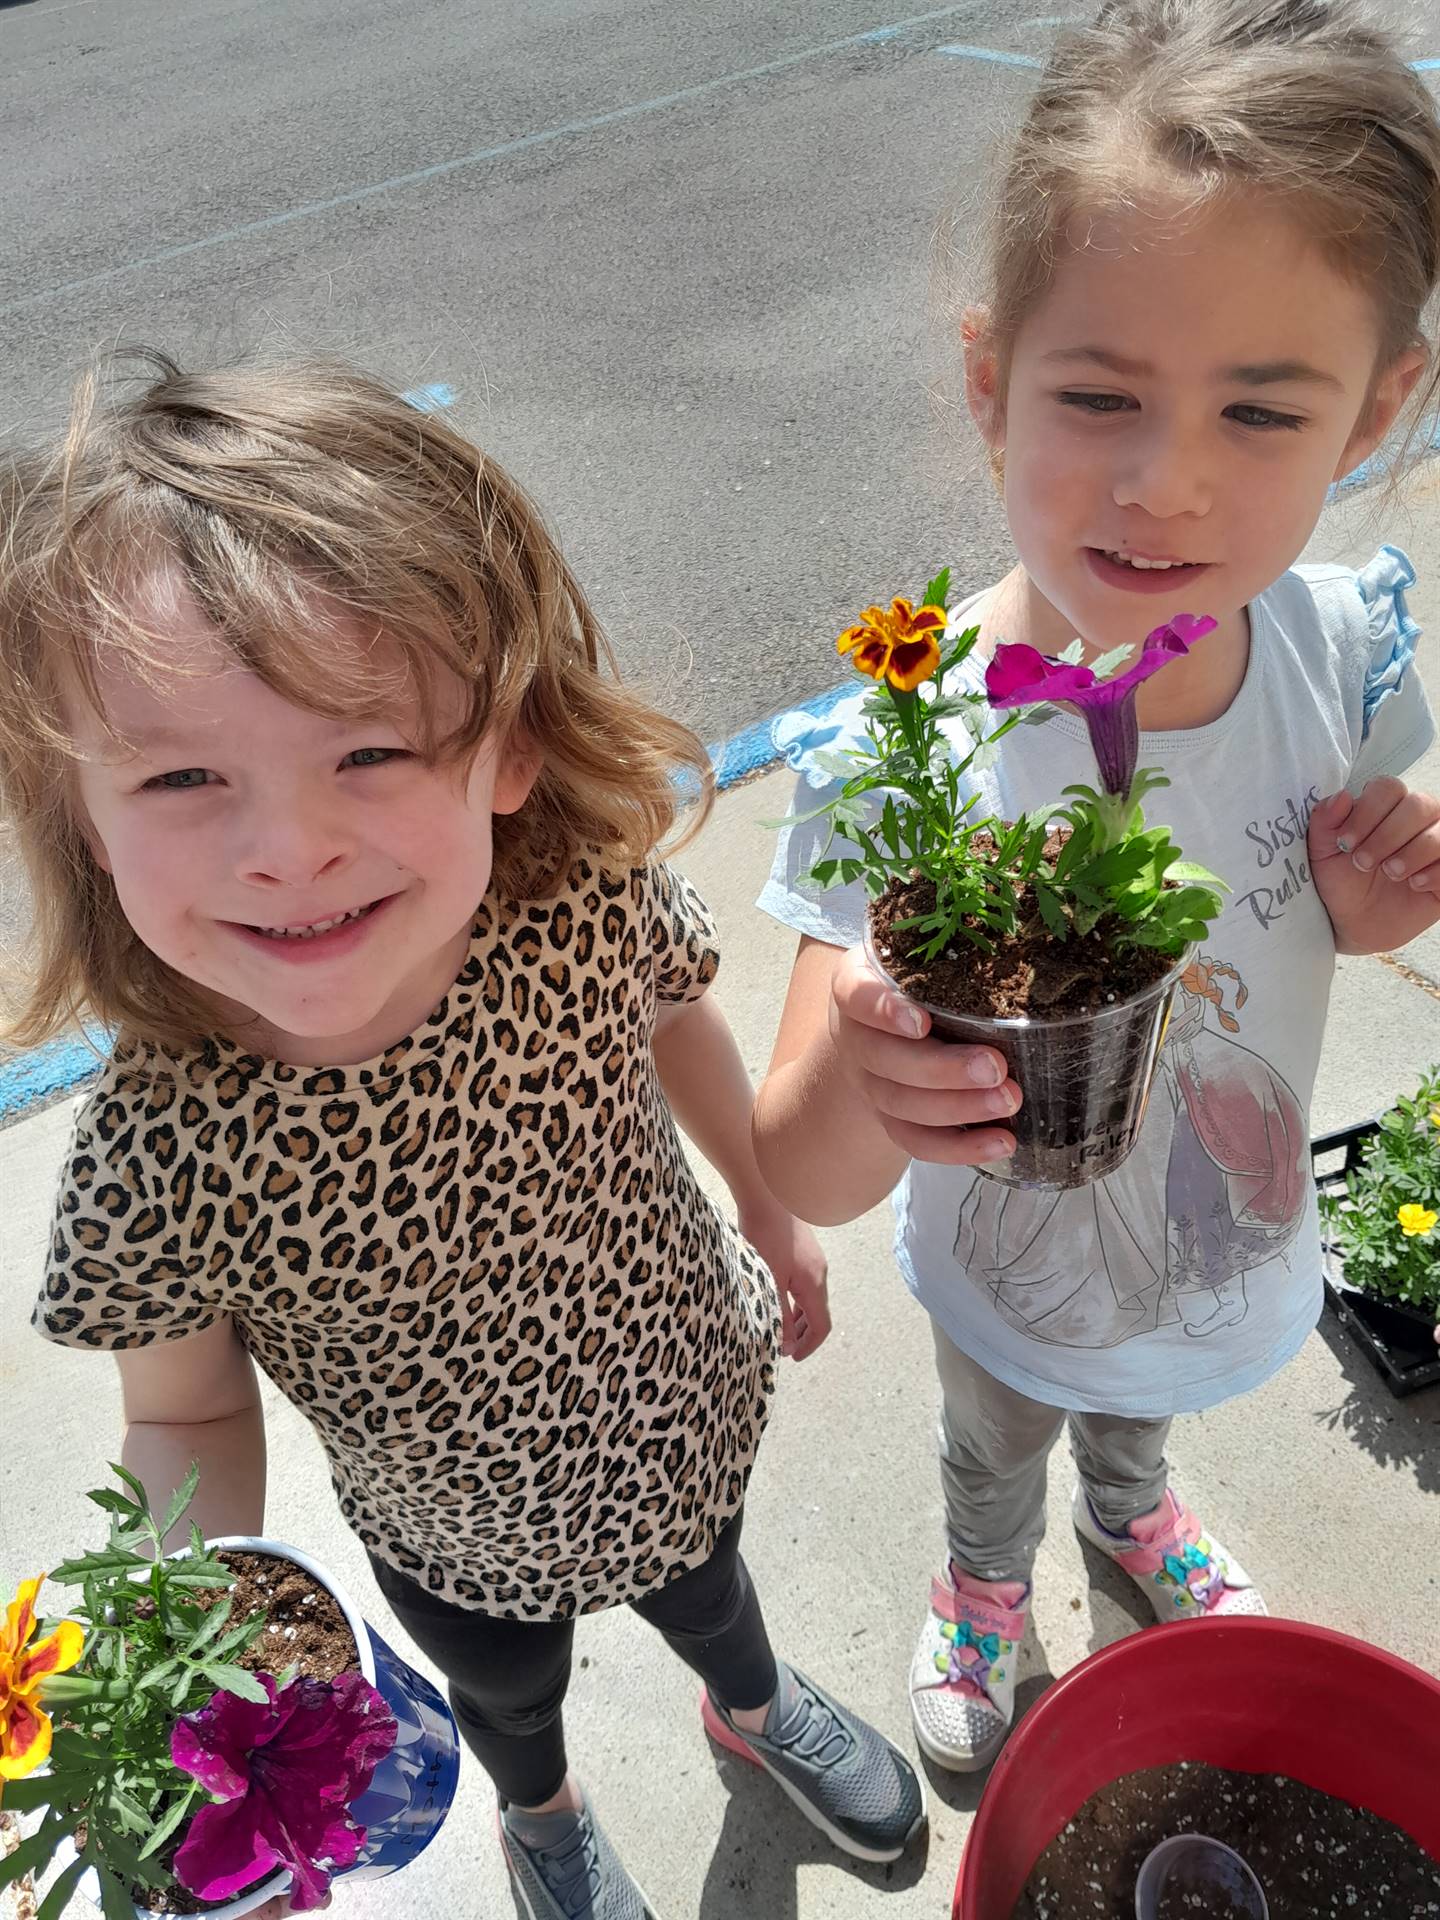 2 students hold up planted flowers